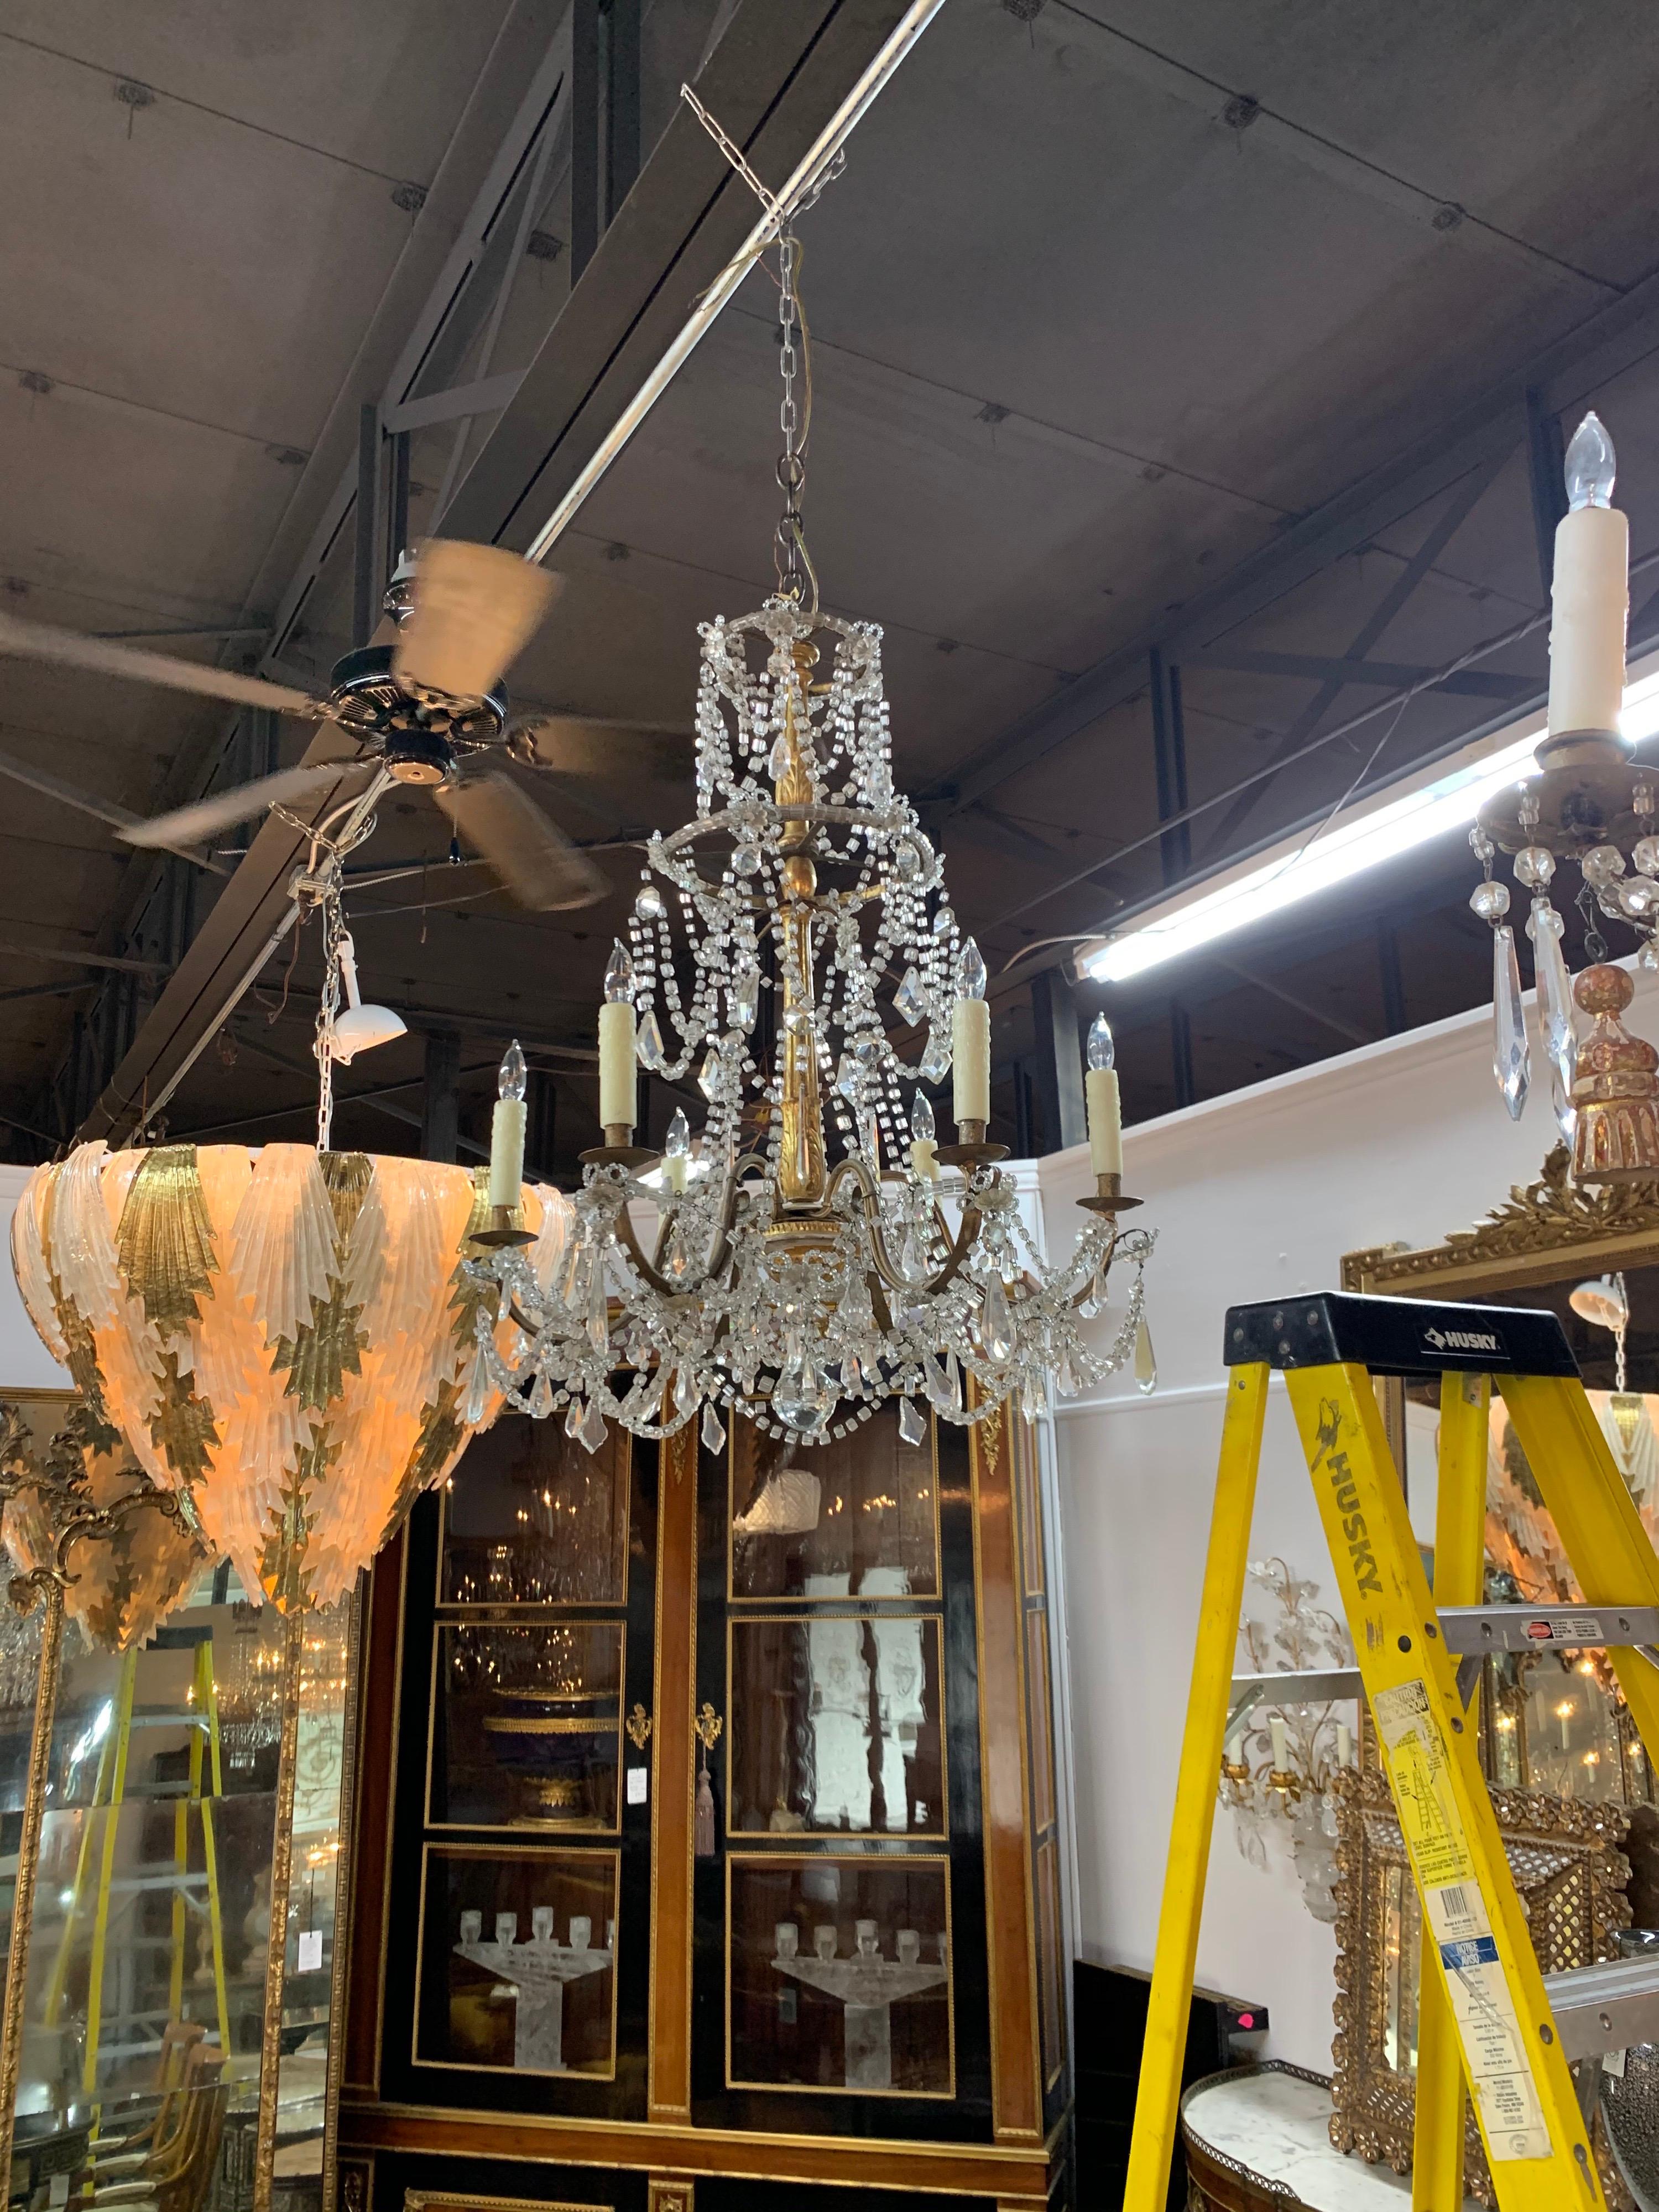 Elegant 19th century giltwood and crystal 6-light chandelier. This fixture is draped with beautiful crystal beads and prisms. The carved giltwood base is really pretty as well. A classic beauty!